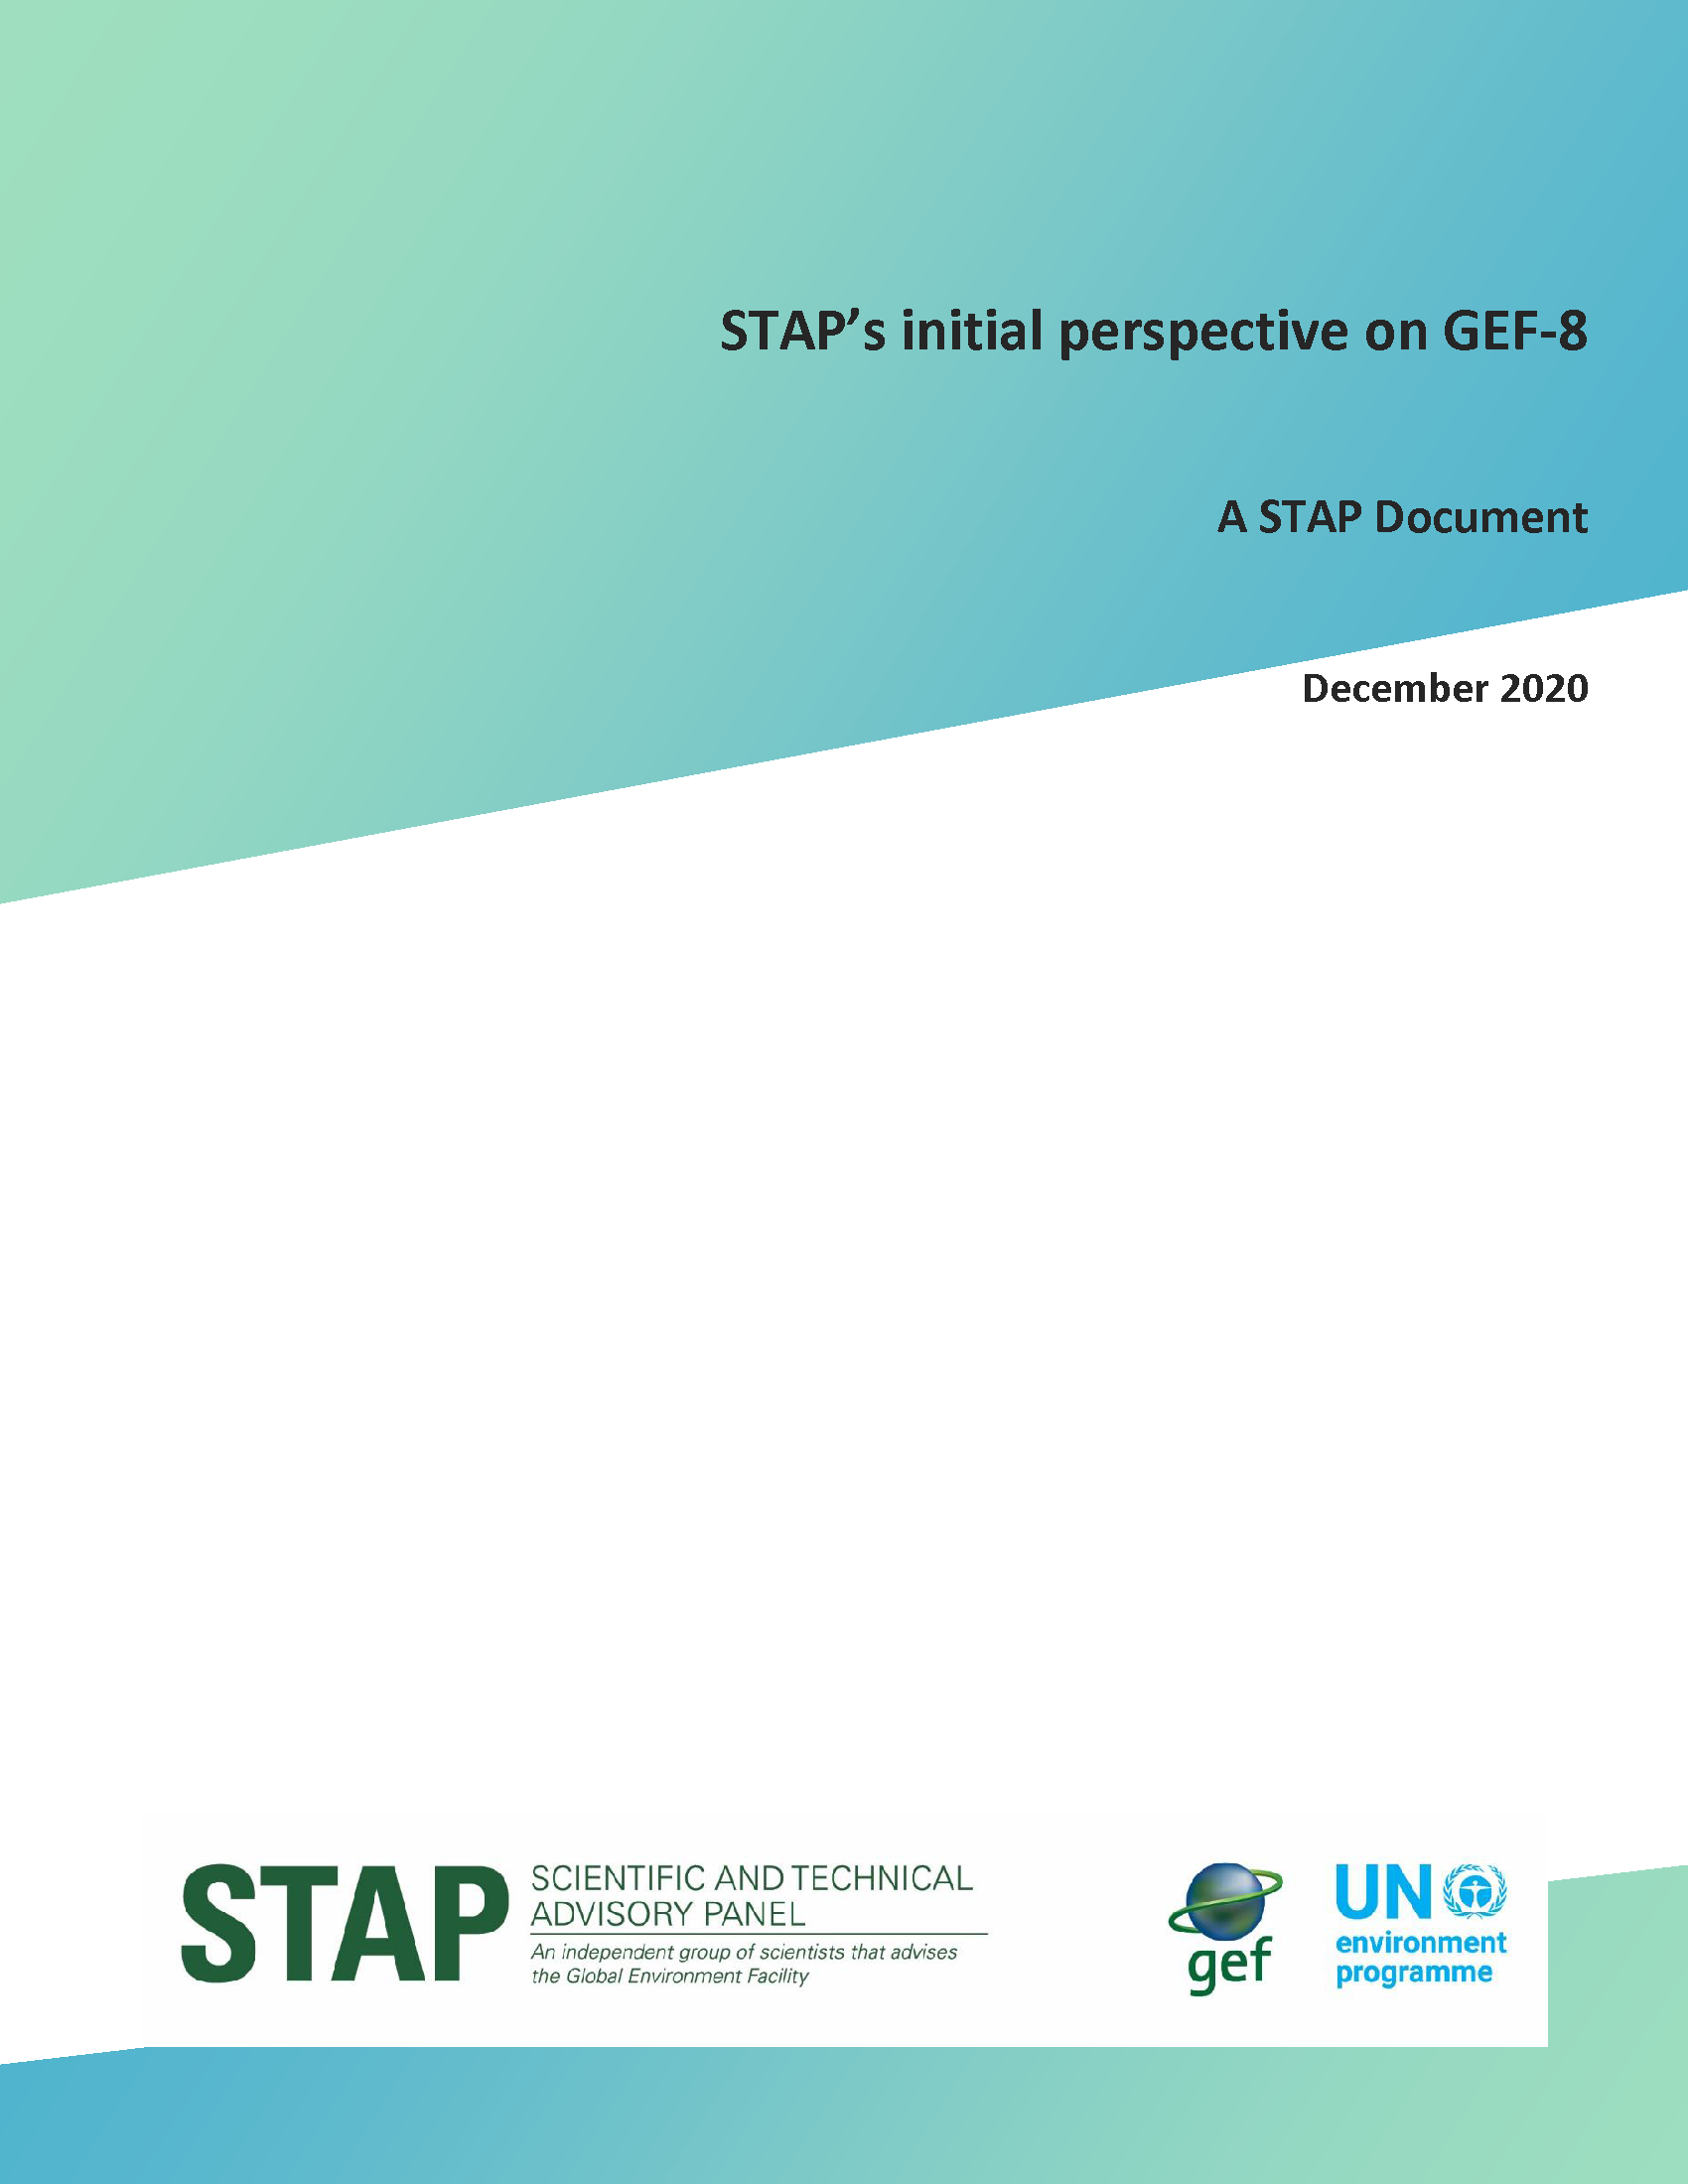 STAP's Initial Perspective on GEF-8